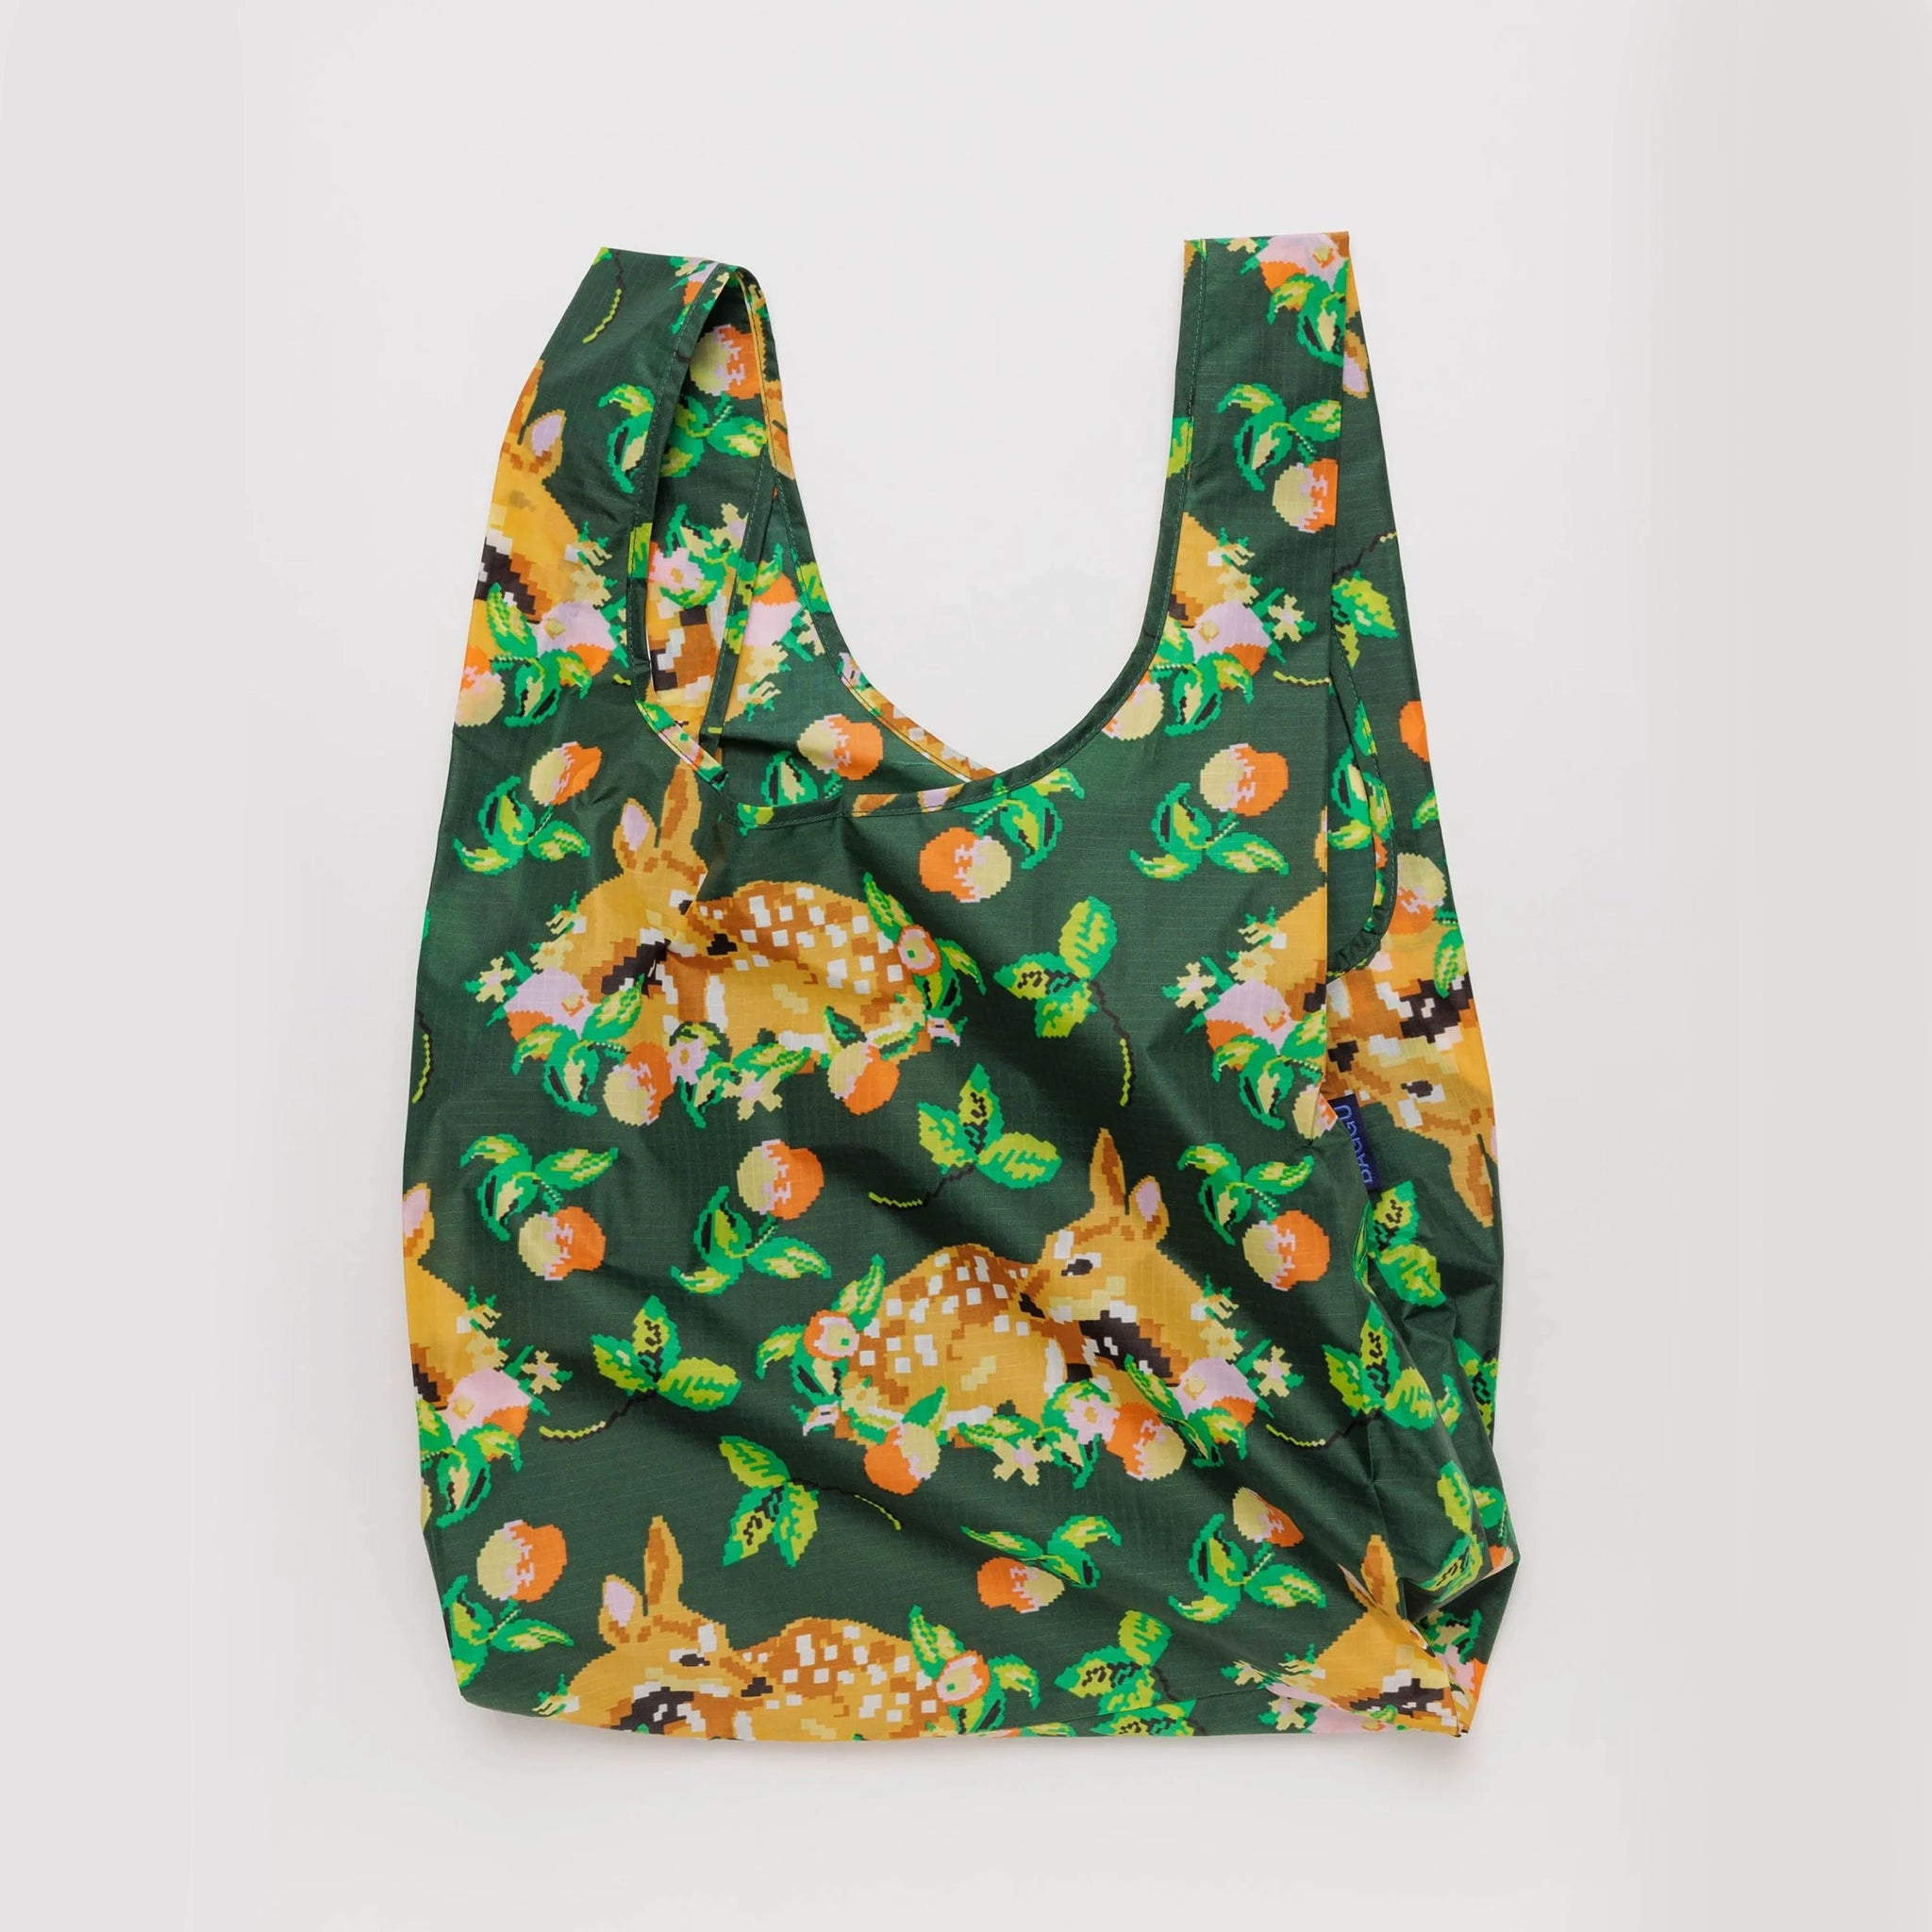 On a white background is a green nylon bag with a deer pattern. 